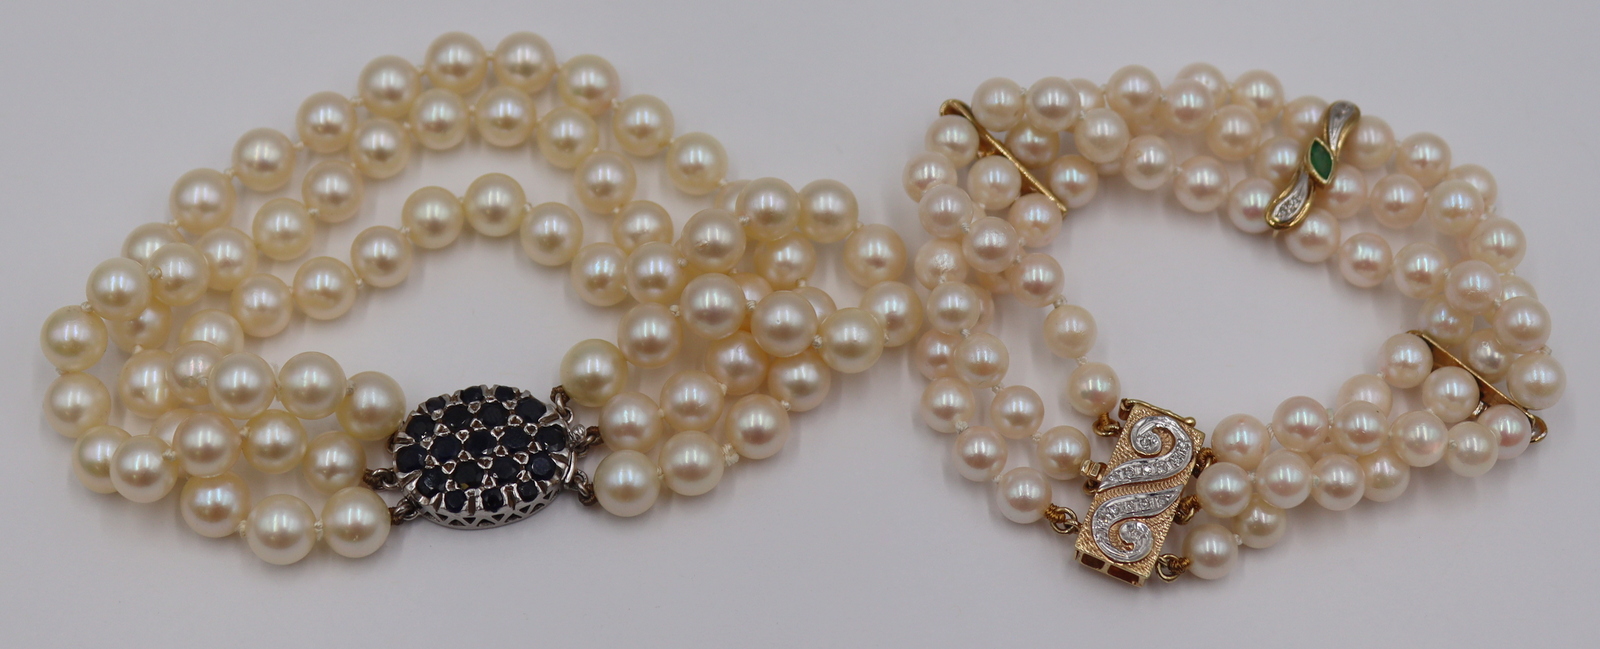 JEWELRY 2 14KT GOLD AND PEARL 3bdae0